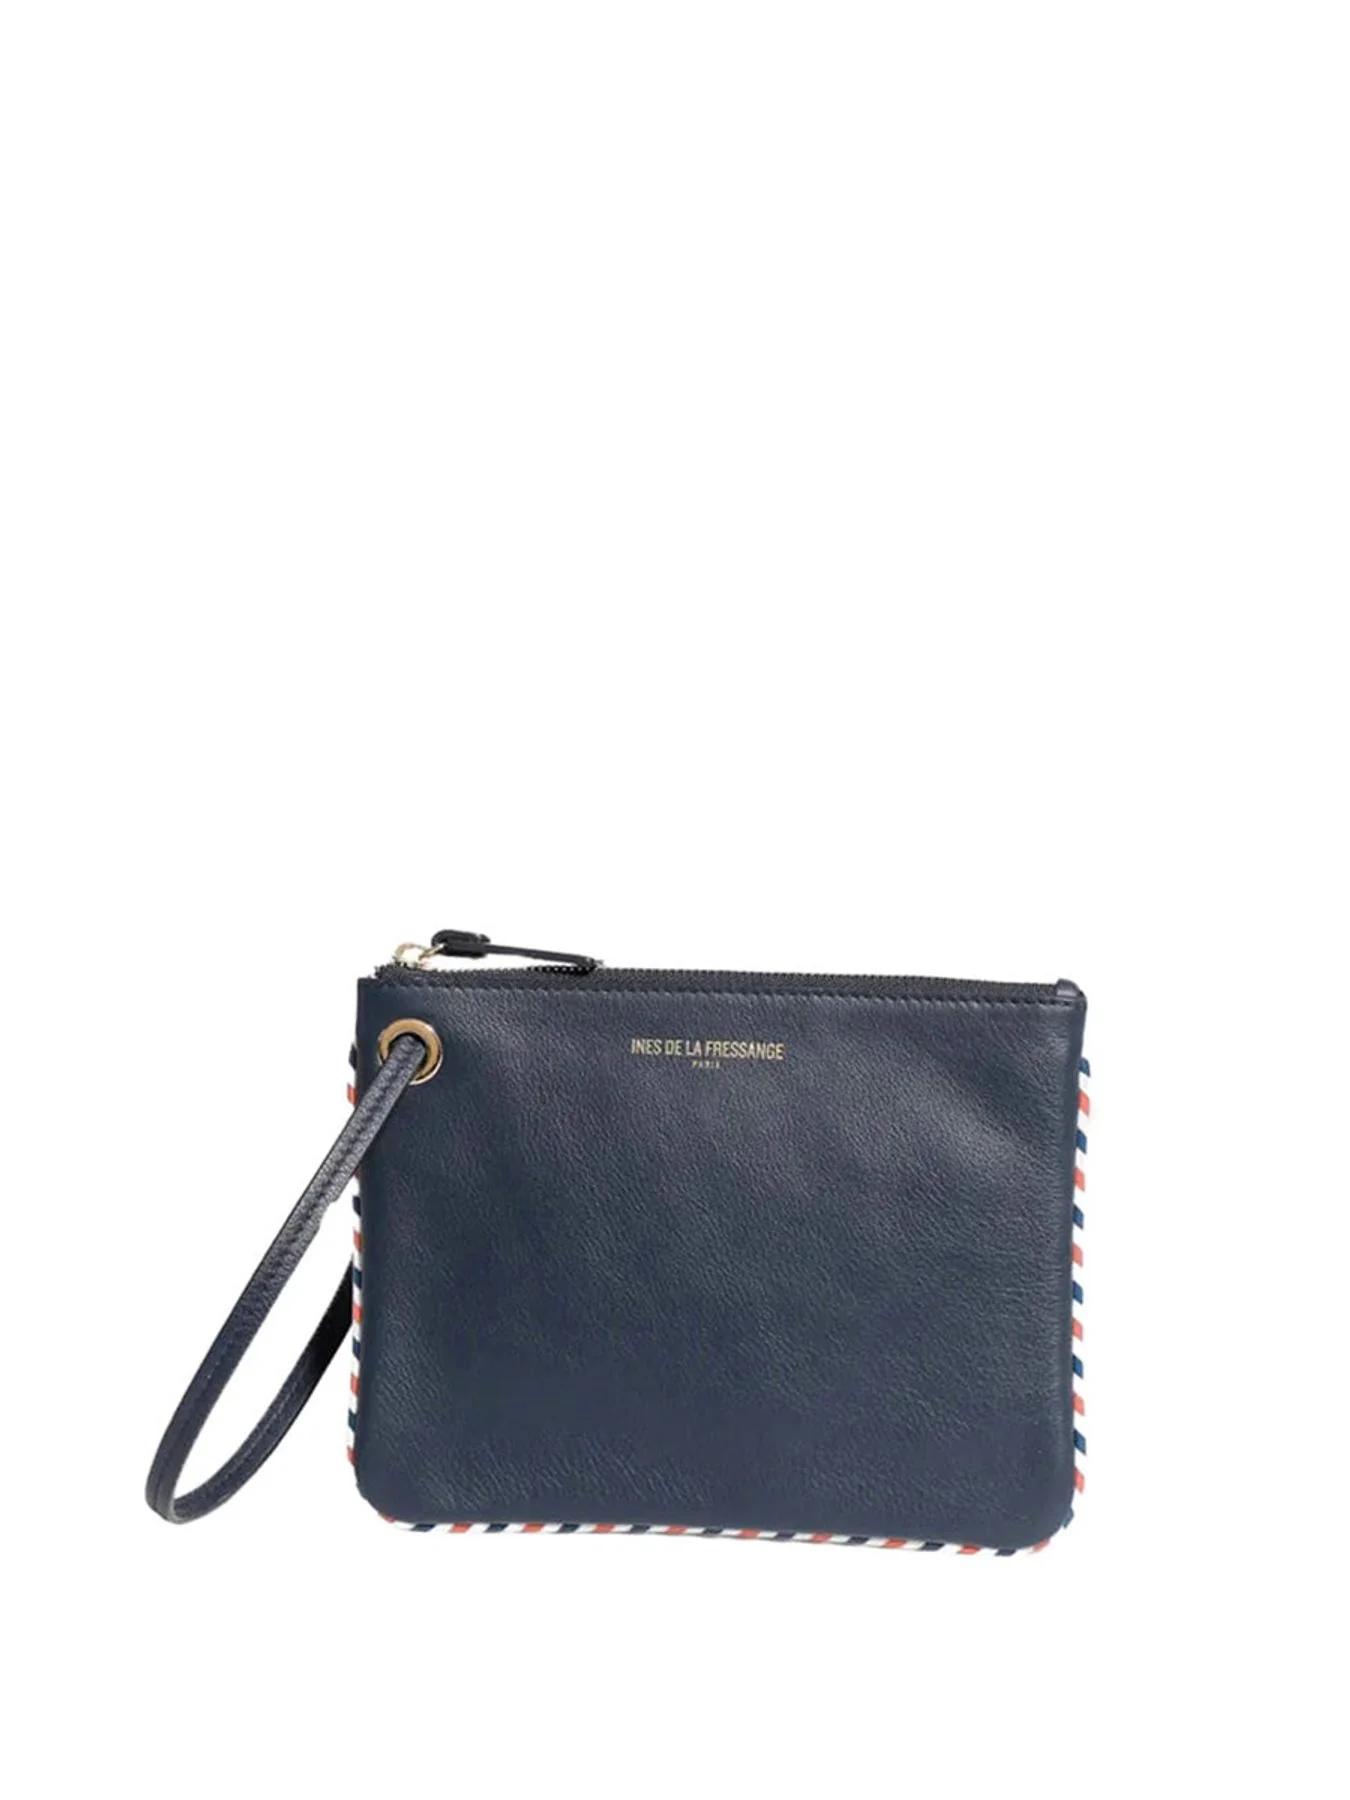 marcia-m-leather-blue-navy pouch